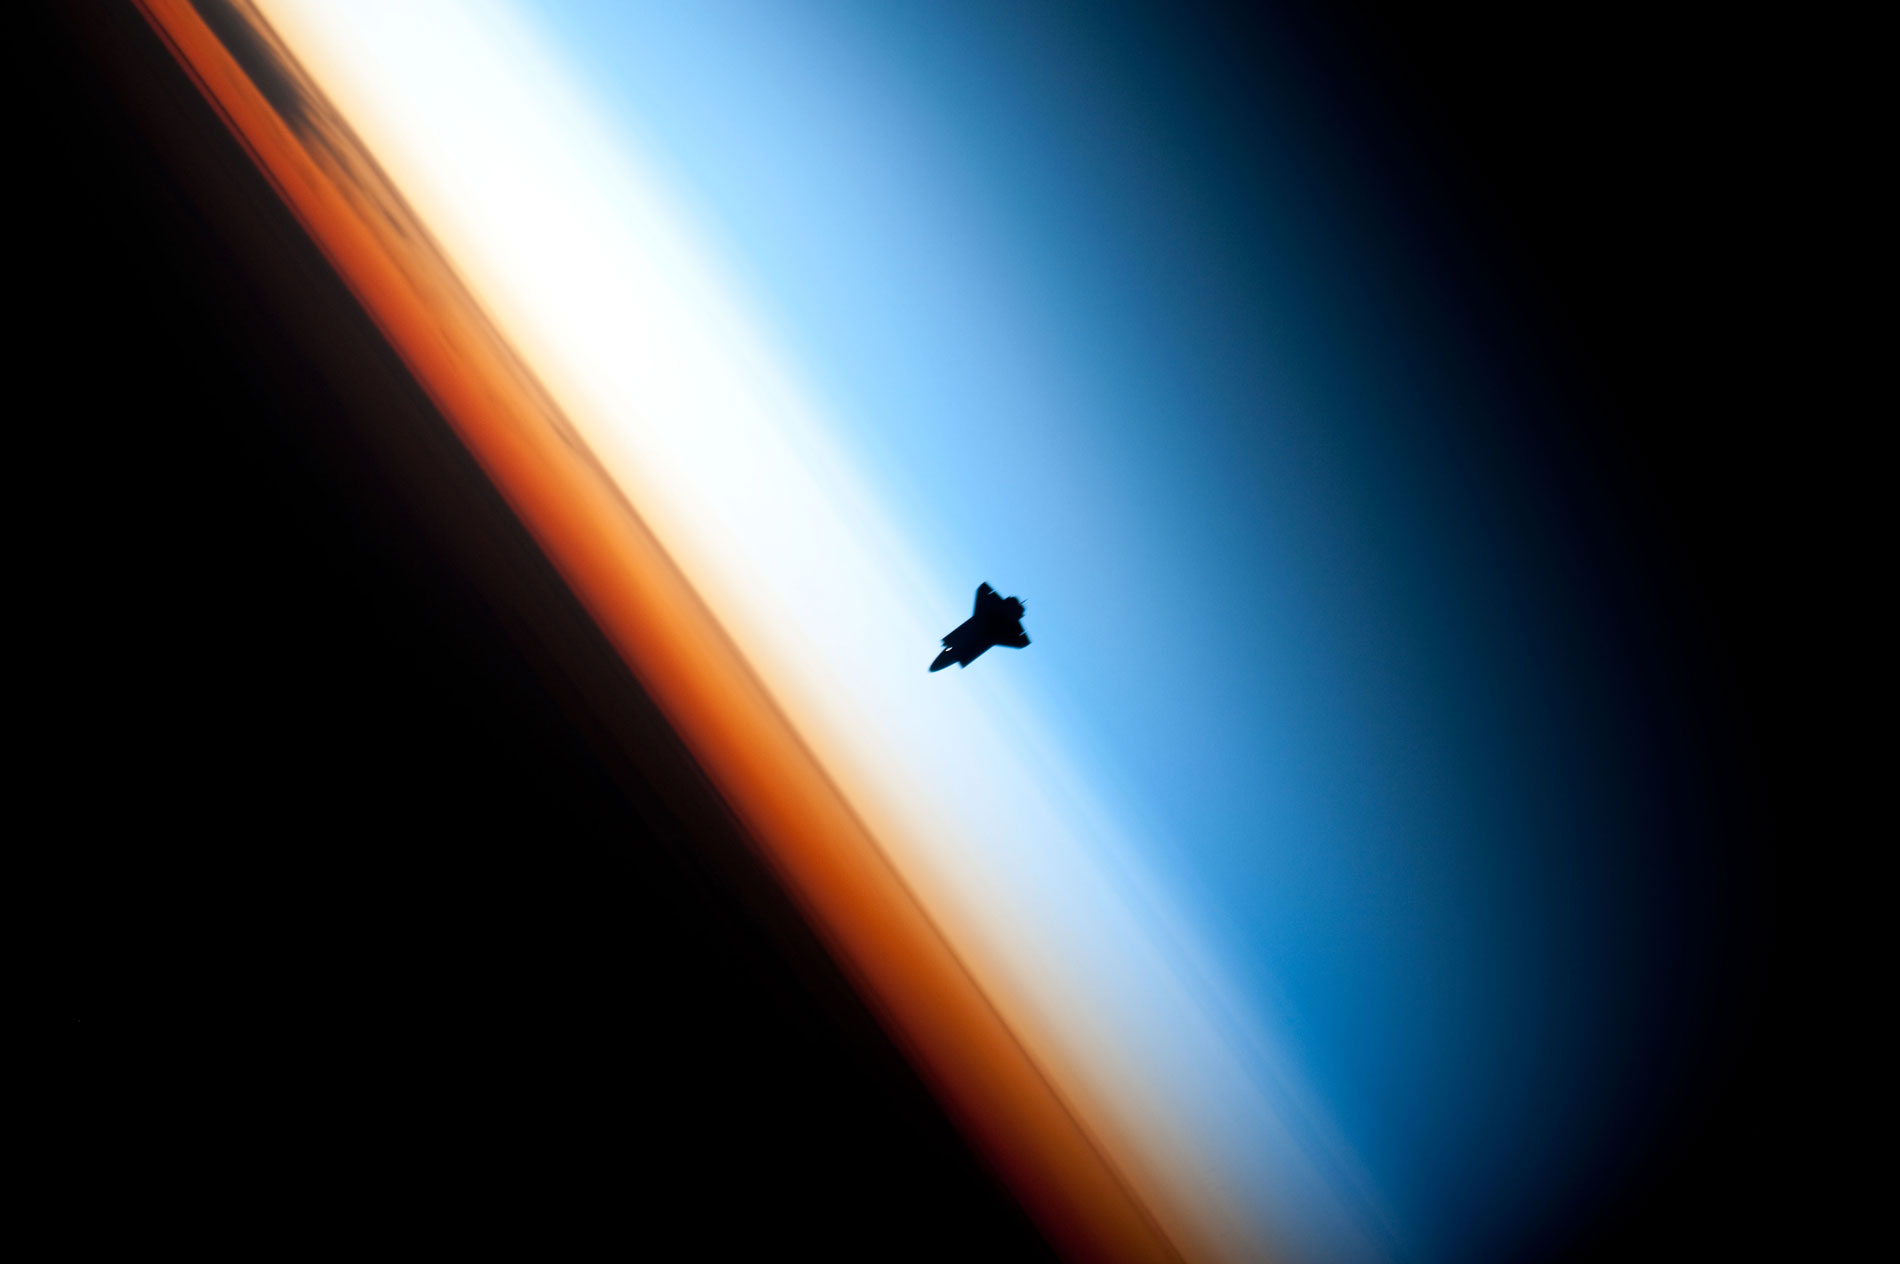 Image of Space Shuttle over a darkened Earth with three colorful layers of atmosphere visible.